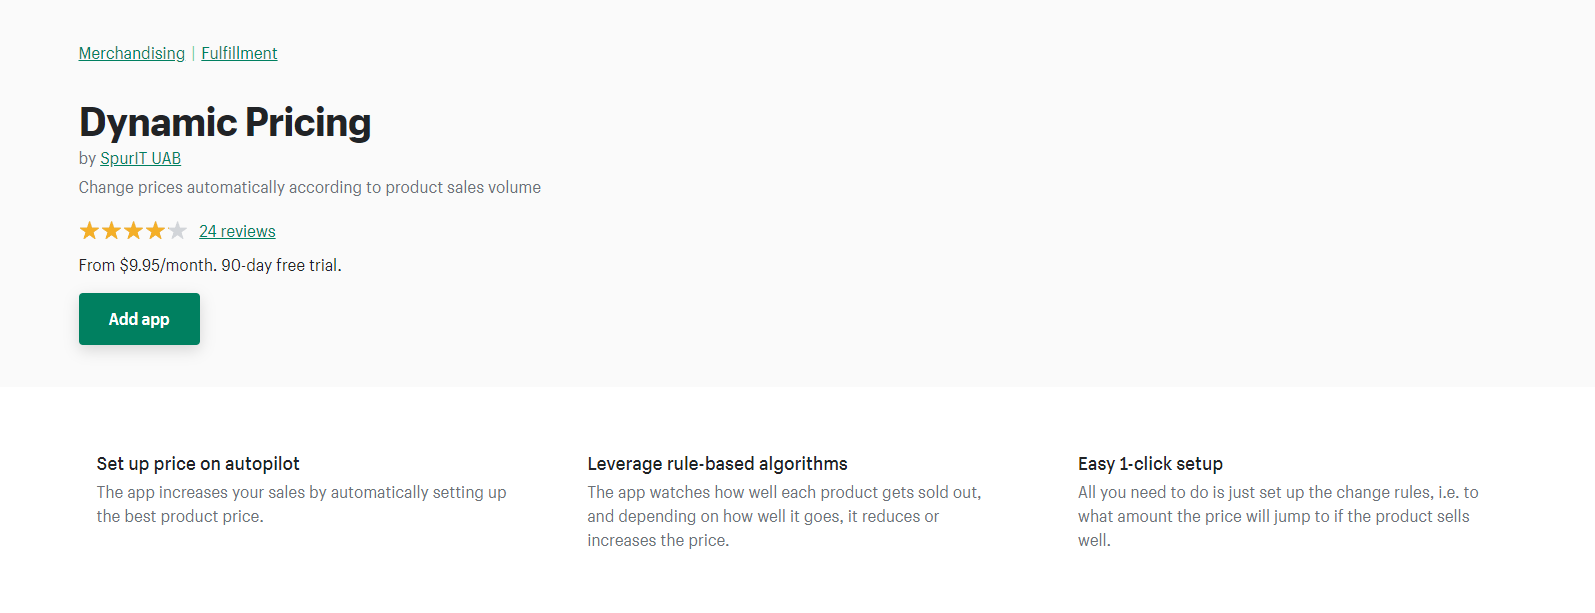 Dynamic Pricing - Best Shopify app to automate prices based on product sales volume